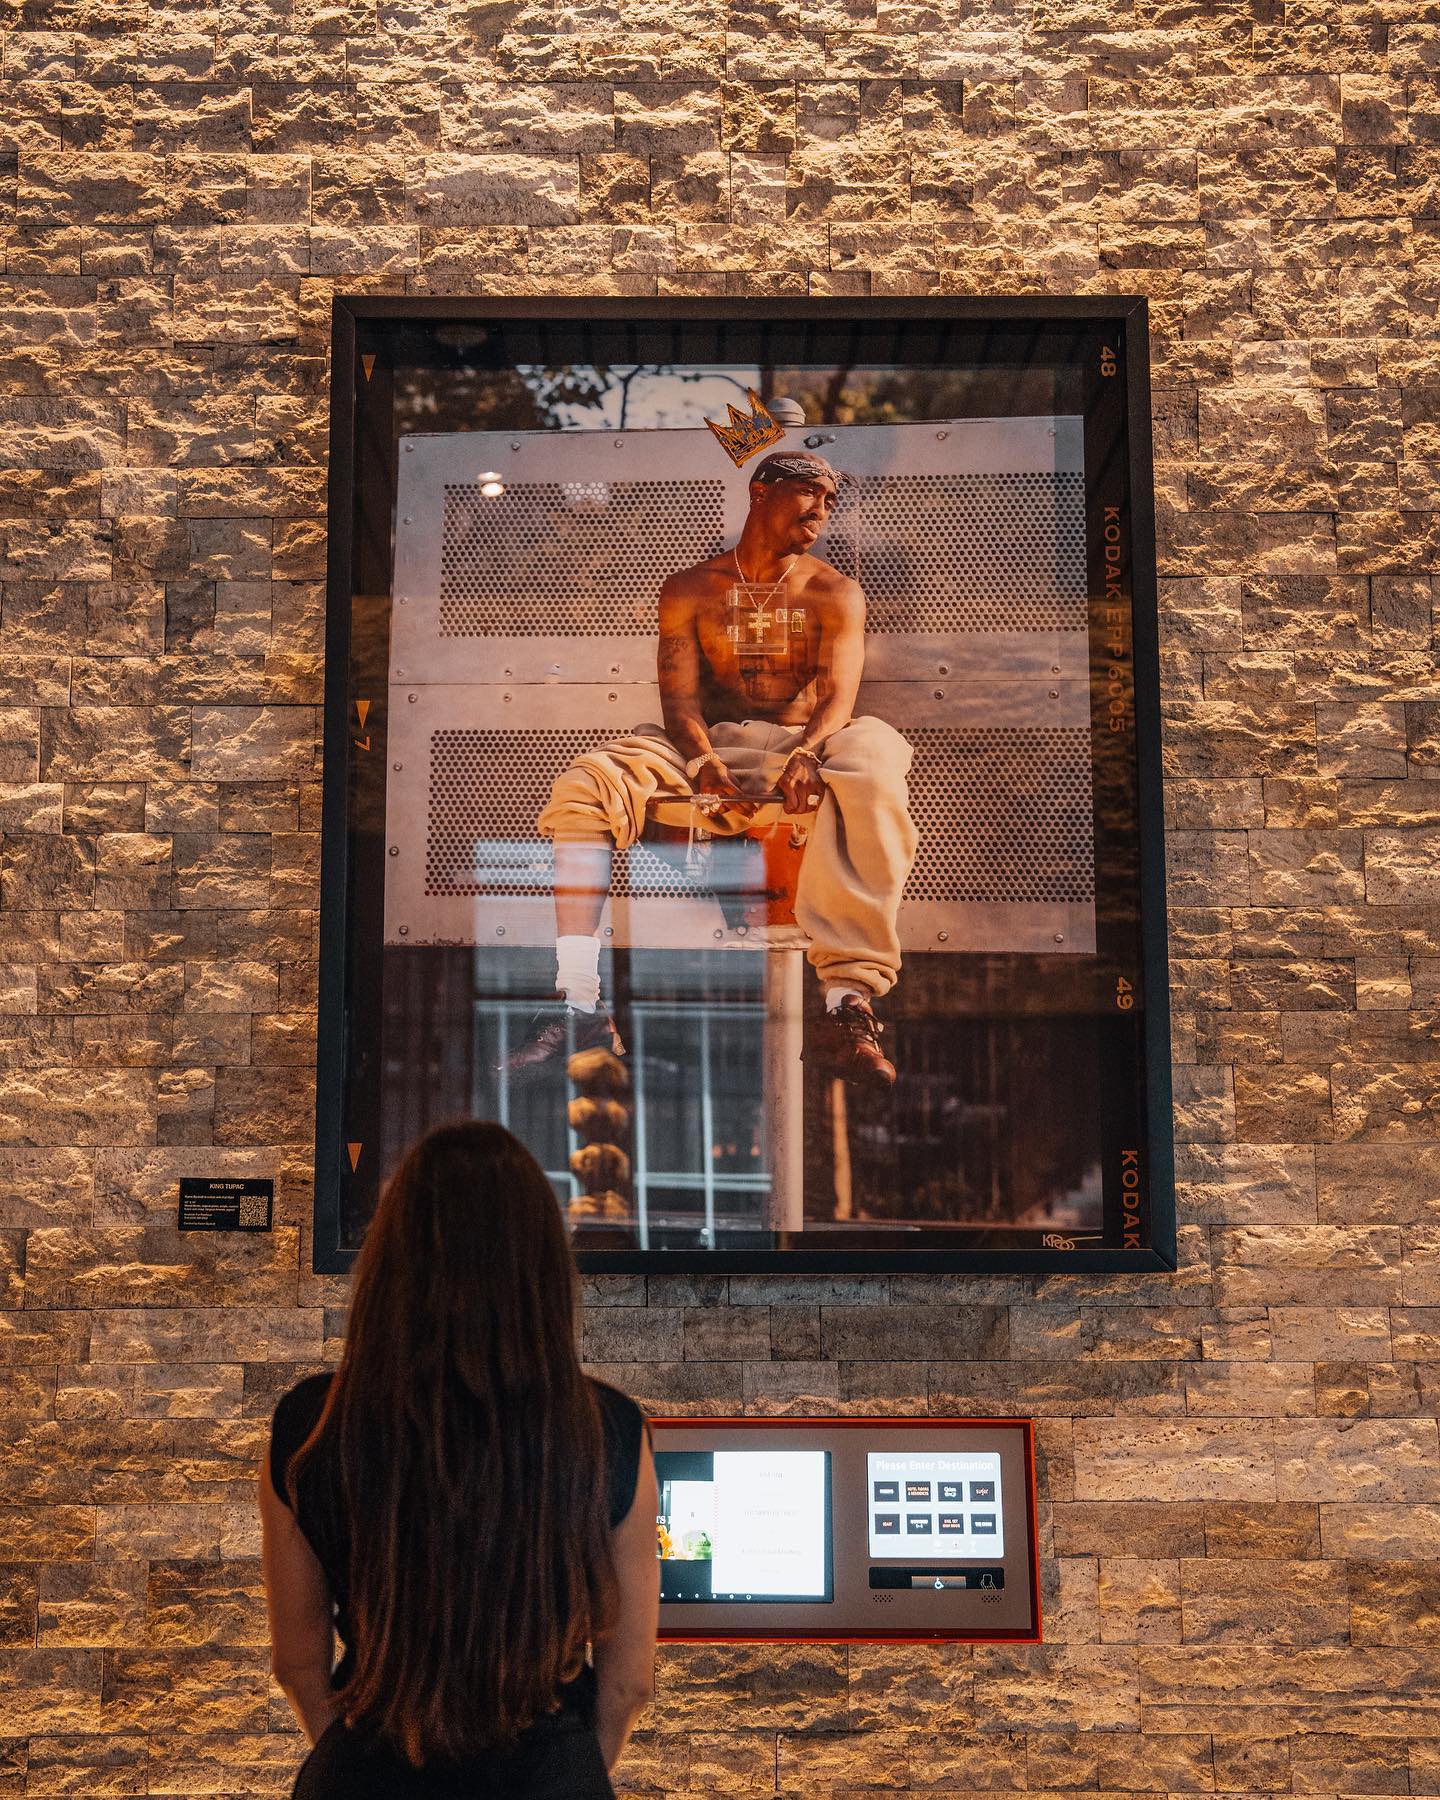 Don’t miss your chance to dive into the vibrant worlds of ‘Gold Queen’ and ‘King Tupac’ in our lobby. 

The partnership with artist / curator Karen Bystedt offers a unique glimpse into iconic moments, blending history with contemporary flair. Join us for an artful escape that continues to captivate and inspire.
 
@karenbystedt @2pac